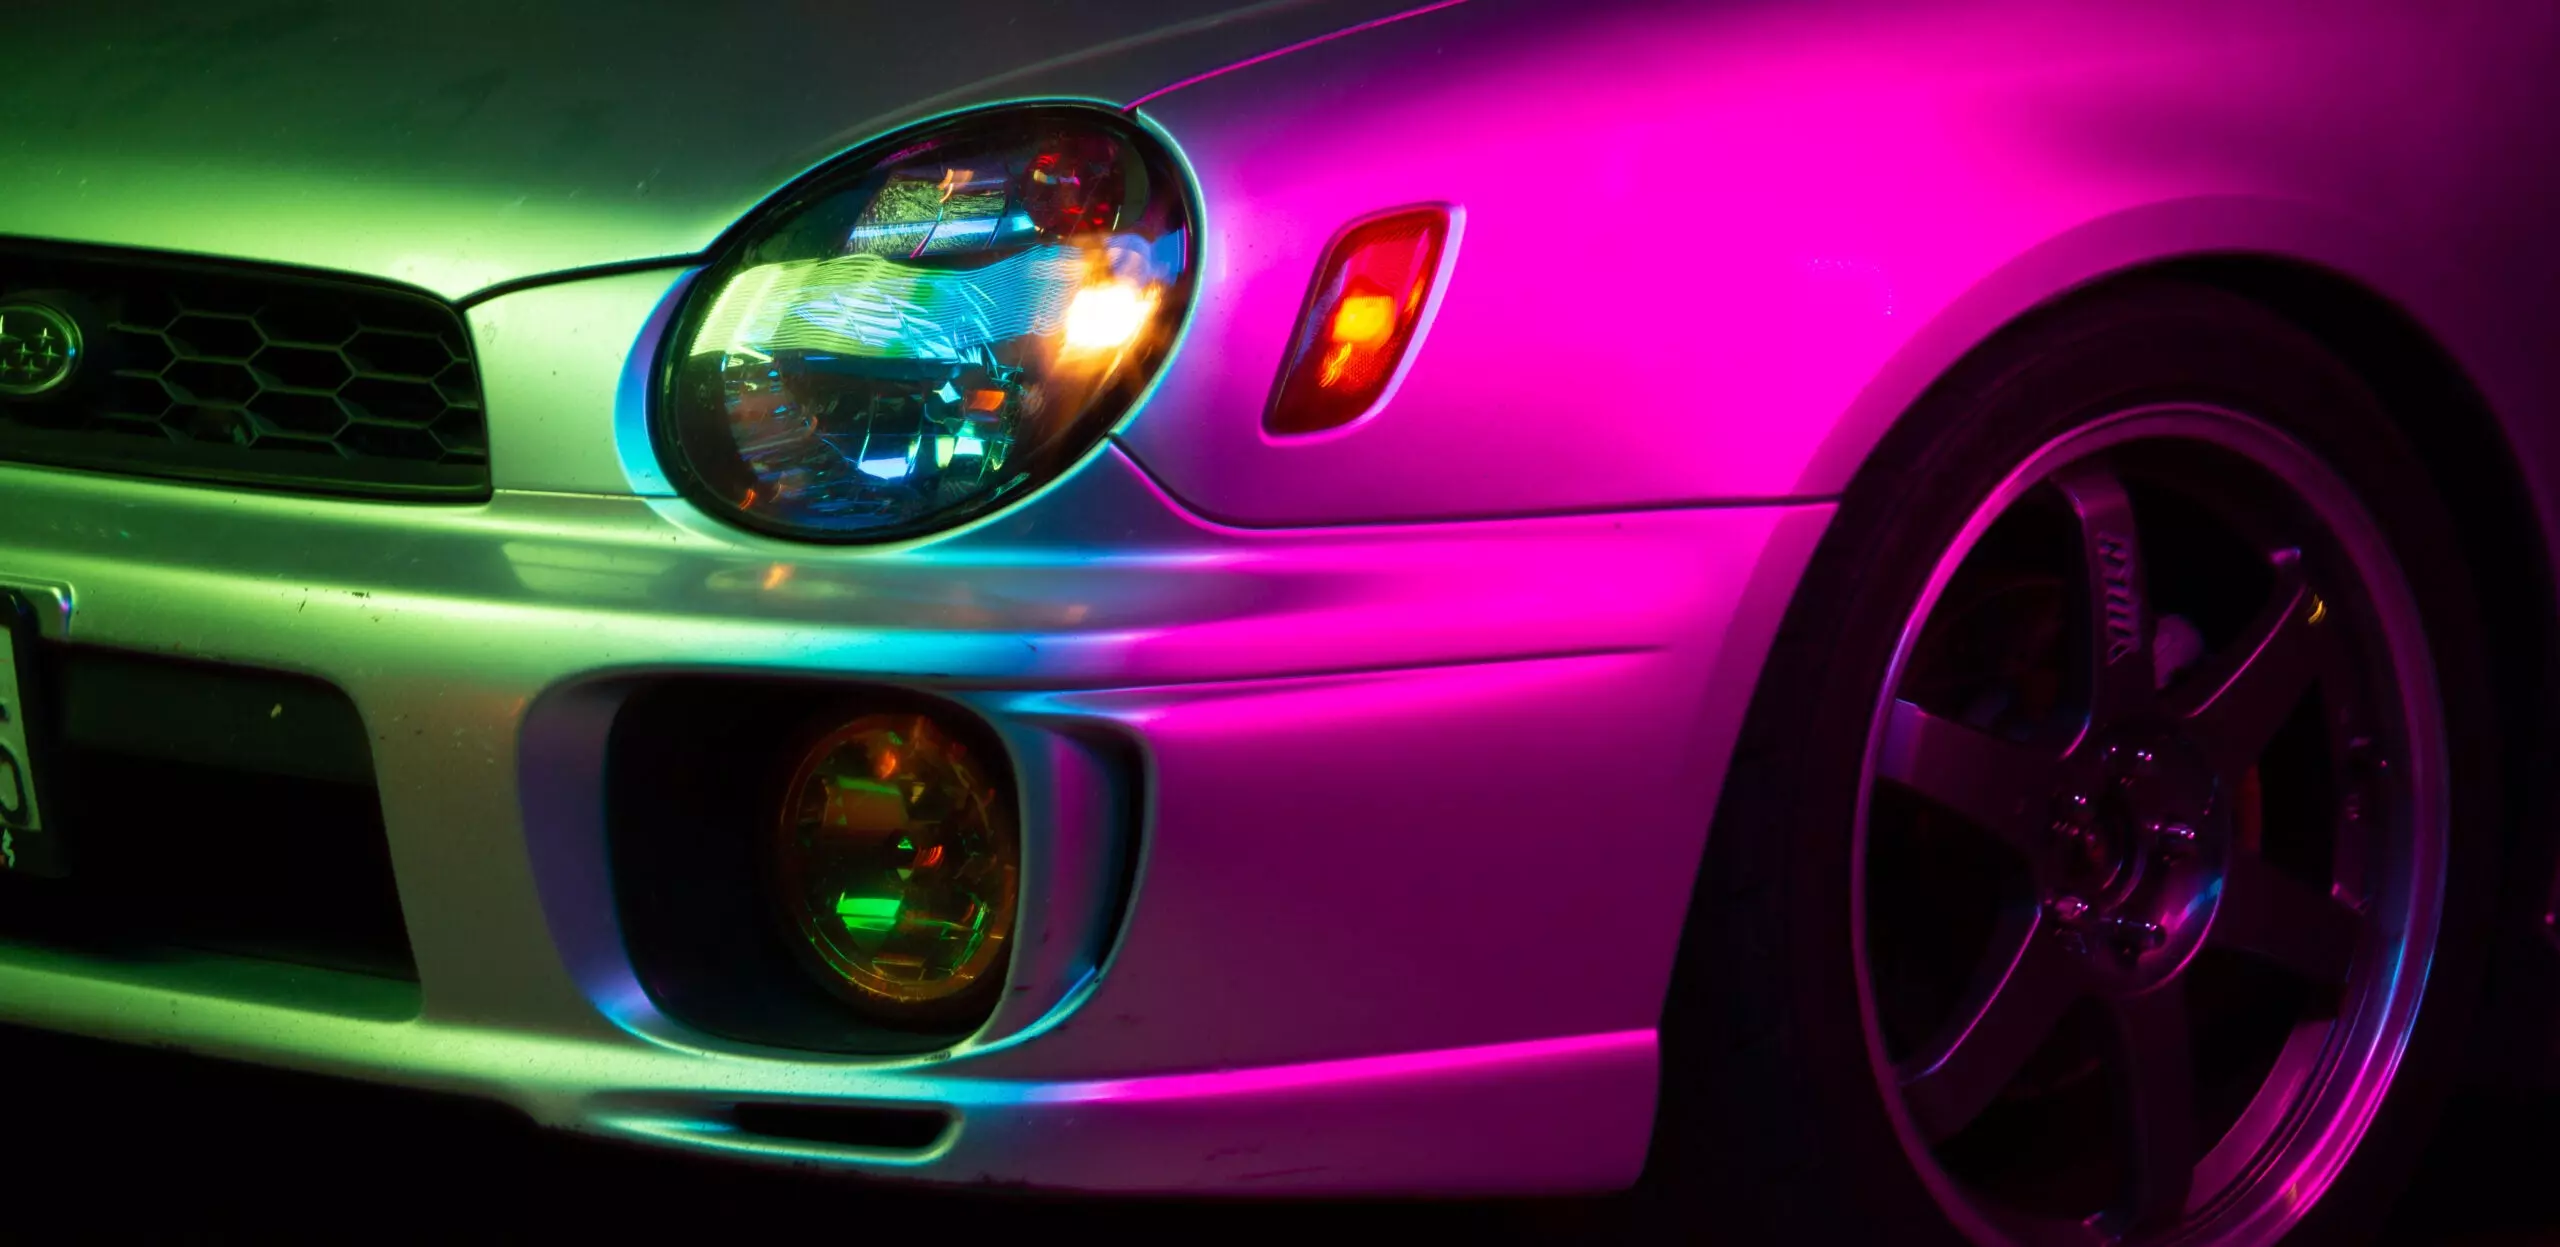 Lights and Color Can Take Your Car Photos to Another Level